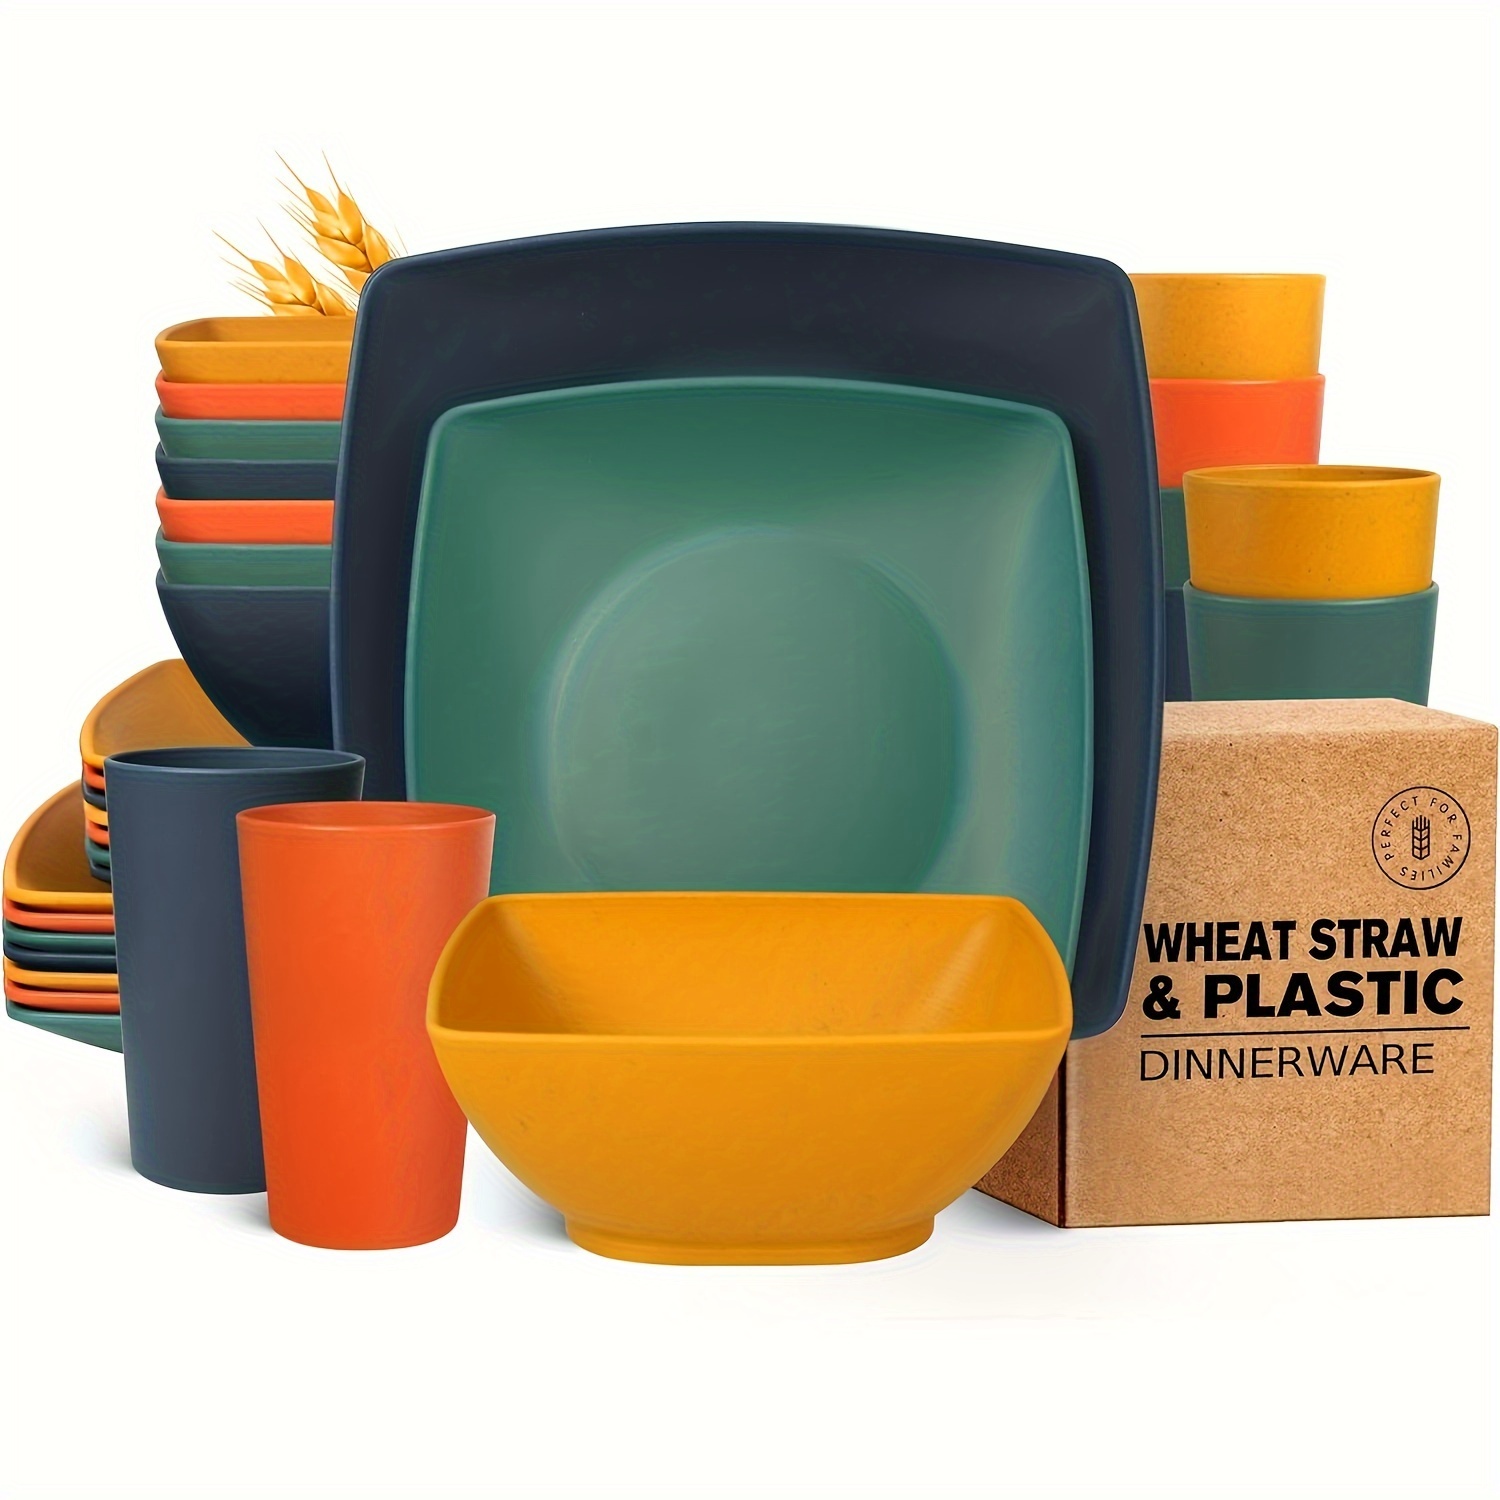 

Teivio 32-piece Plastic Wheat Straw Square Dinnerware Set For 8, Unbreakable Dinner Plates, Salad Plates, Snack Bowls, Tumblers 20 Oz, Dishwasher Safe, Autumn Multicolor